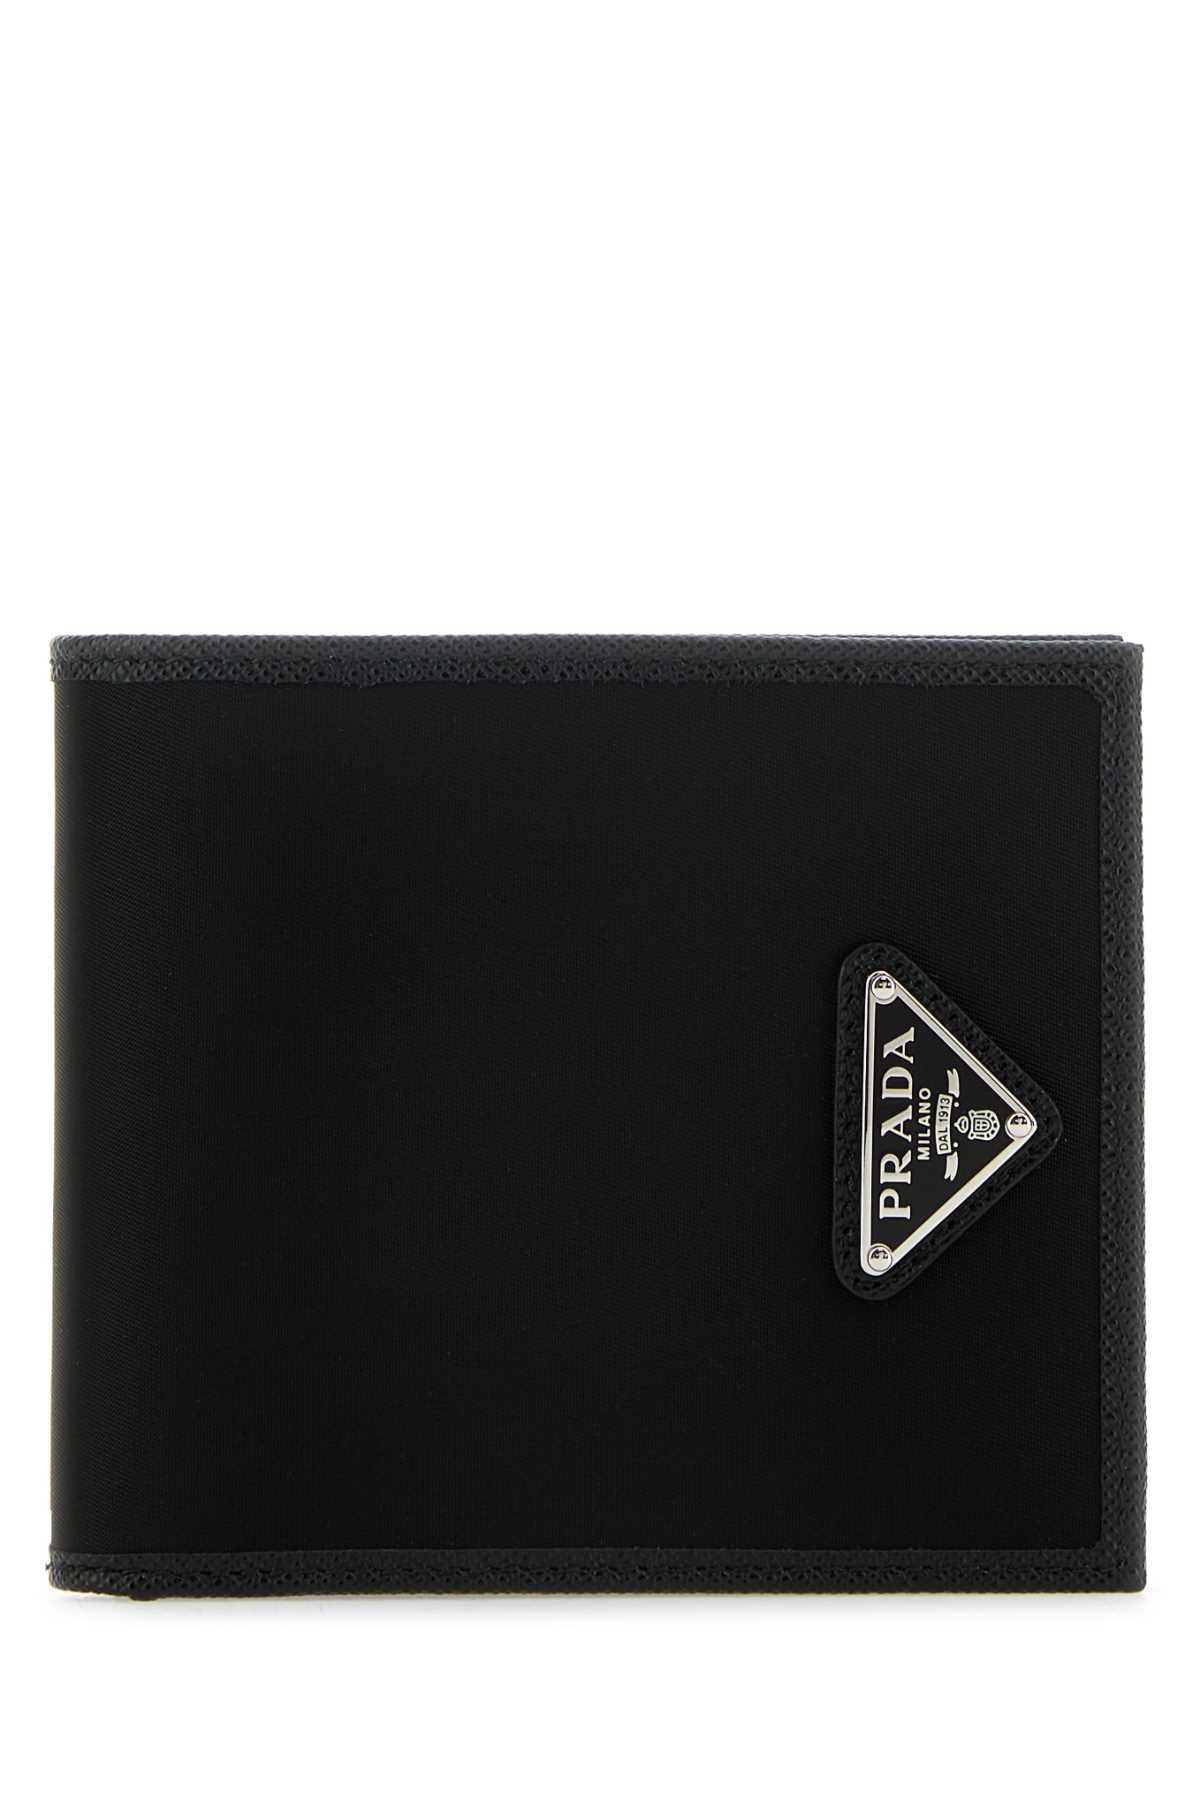 Prada Black Fabric And Leather Wallet